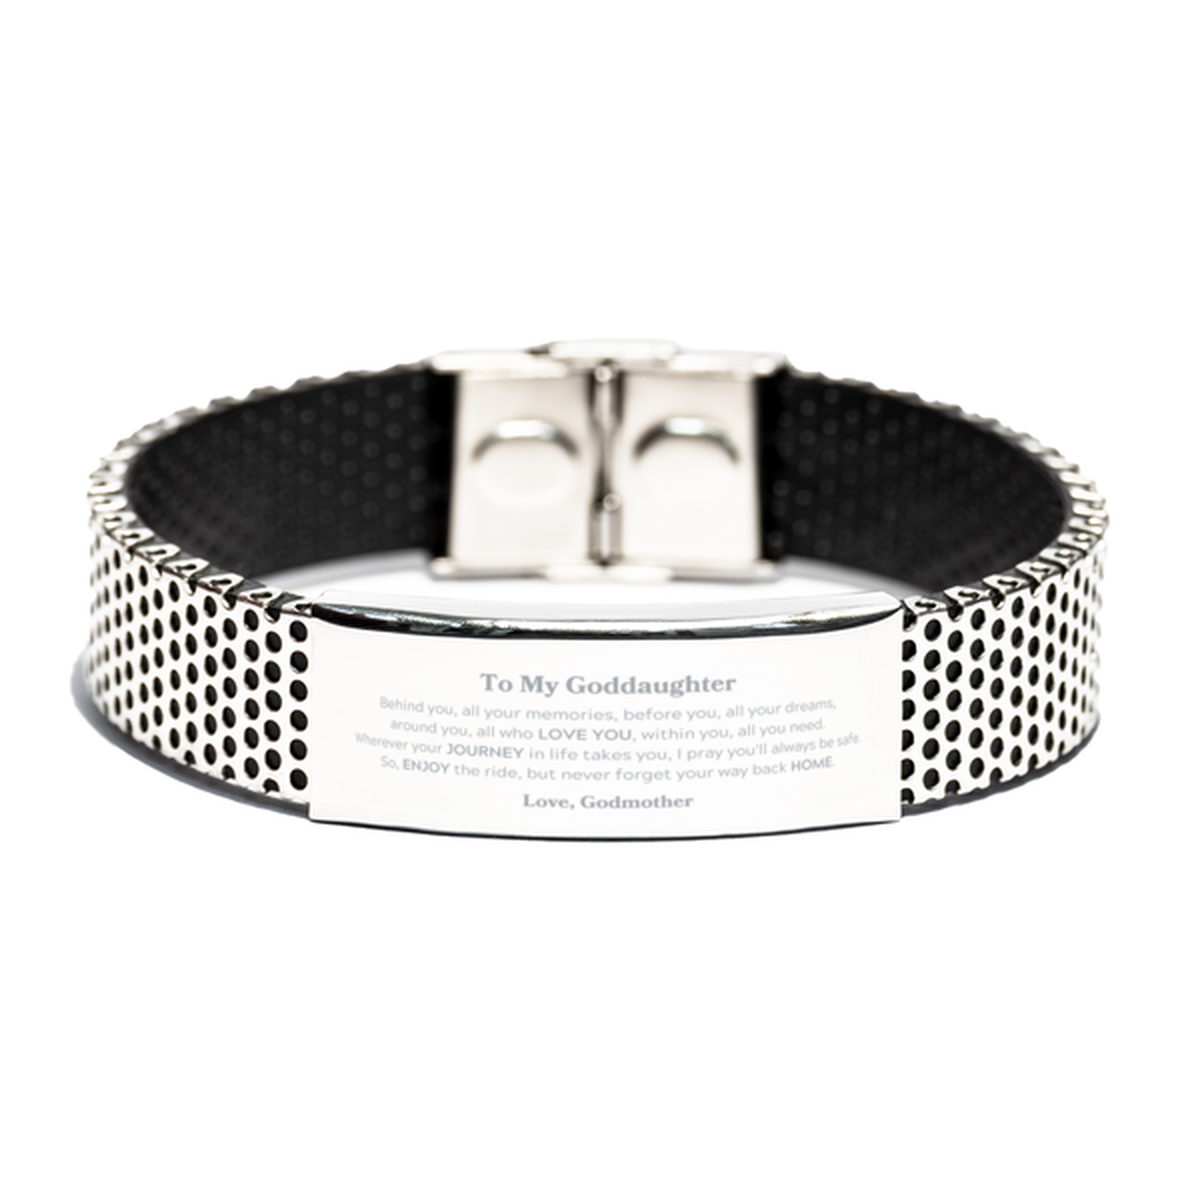 To My Goddaughter Graduation Gifts from Godmother, Goddaughter Stainless Steel Bracelet Christmas Birthday Gifts for Goddaughter Behind you, all your memories, before you, all your dreams. Love, Godmother